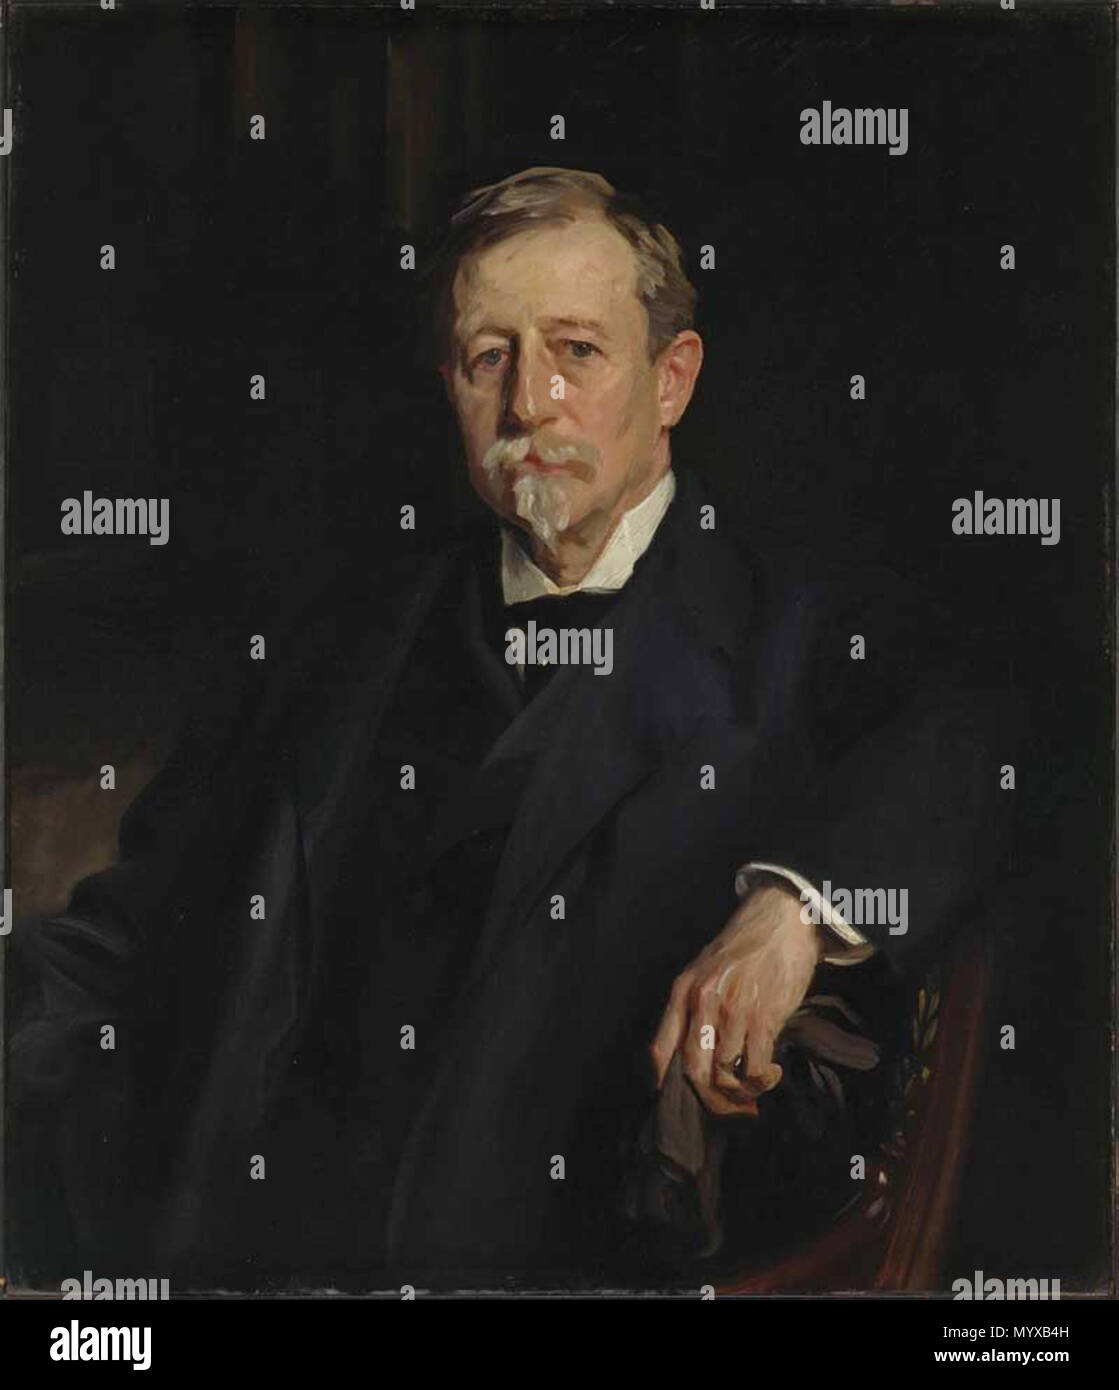 . English: Aaron Augustus Healy John Singer Sargent -- American painter 1907 Brooklyn Museum of Art, NY Oil on canvas 86.5 x 73 cm (34 1/16 x 28 3/4 in) Signed upper right: 'John S. Sargent' Accession # 21.50; Bequest of A. Augustus Healy Jpg: brooklynmuseum  . 1907. John Singer Sargent Born: January 12, 1856, Florence Died: April 14, 1925, London, United Kingdom 6 Aaron Augustus Healy, 1907 Stock Photo